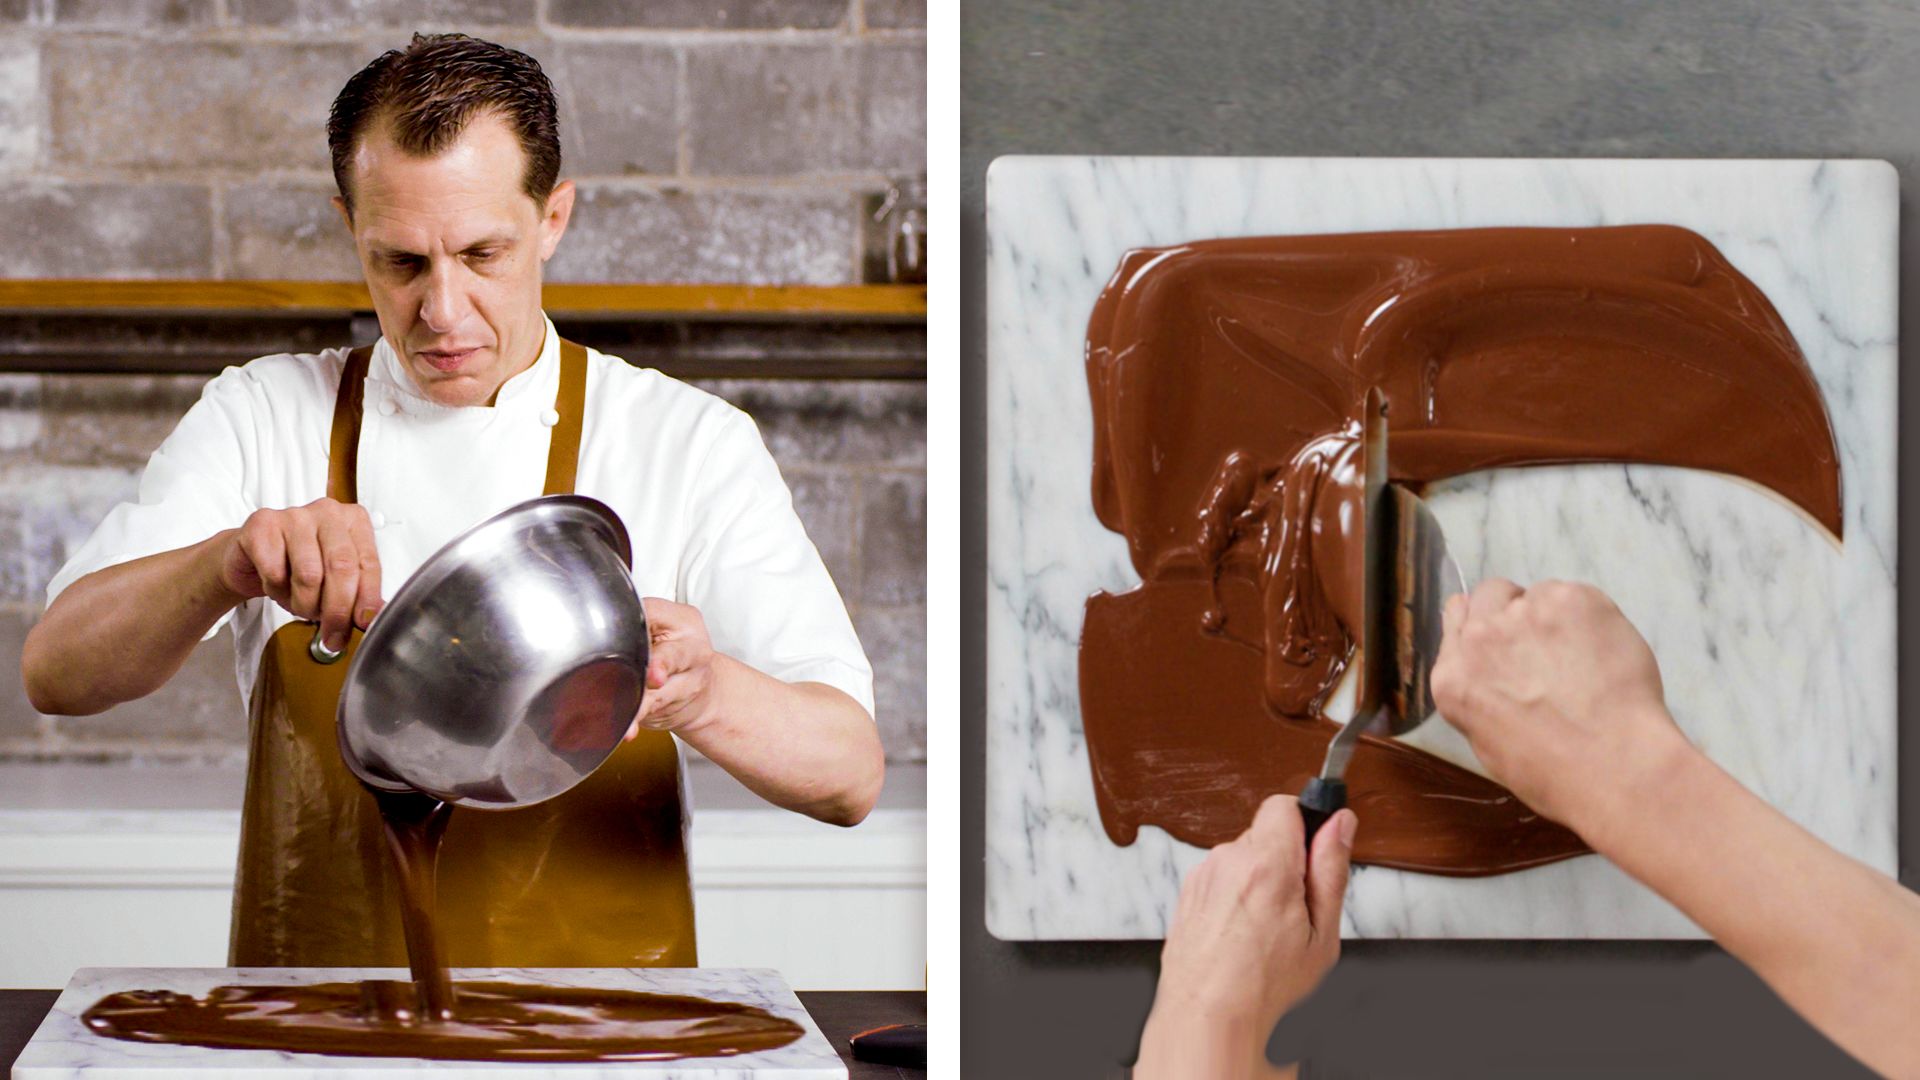 Watch How A Master Chocolatier Makes 5 Gourmet Chocolates, Handcrafted